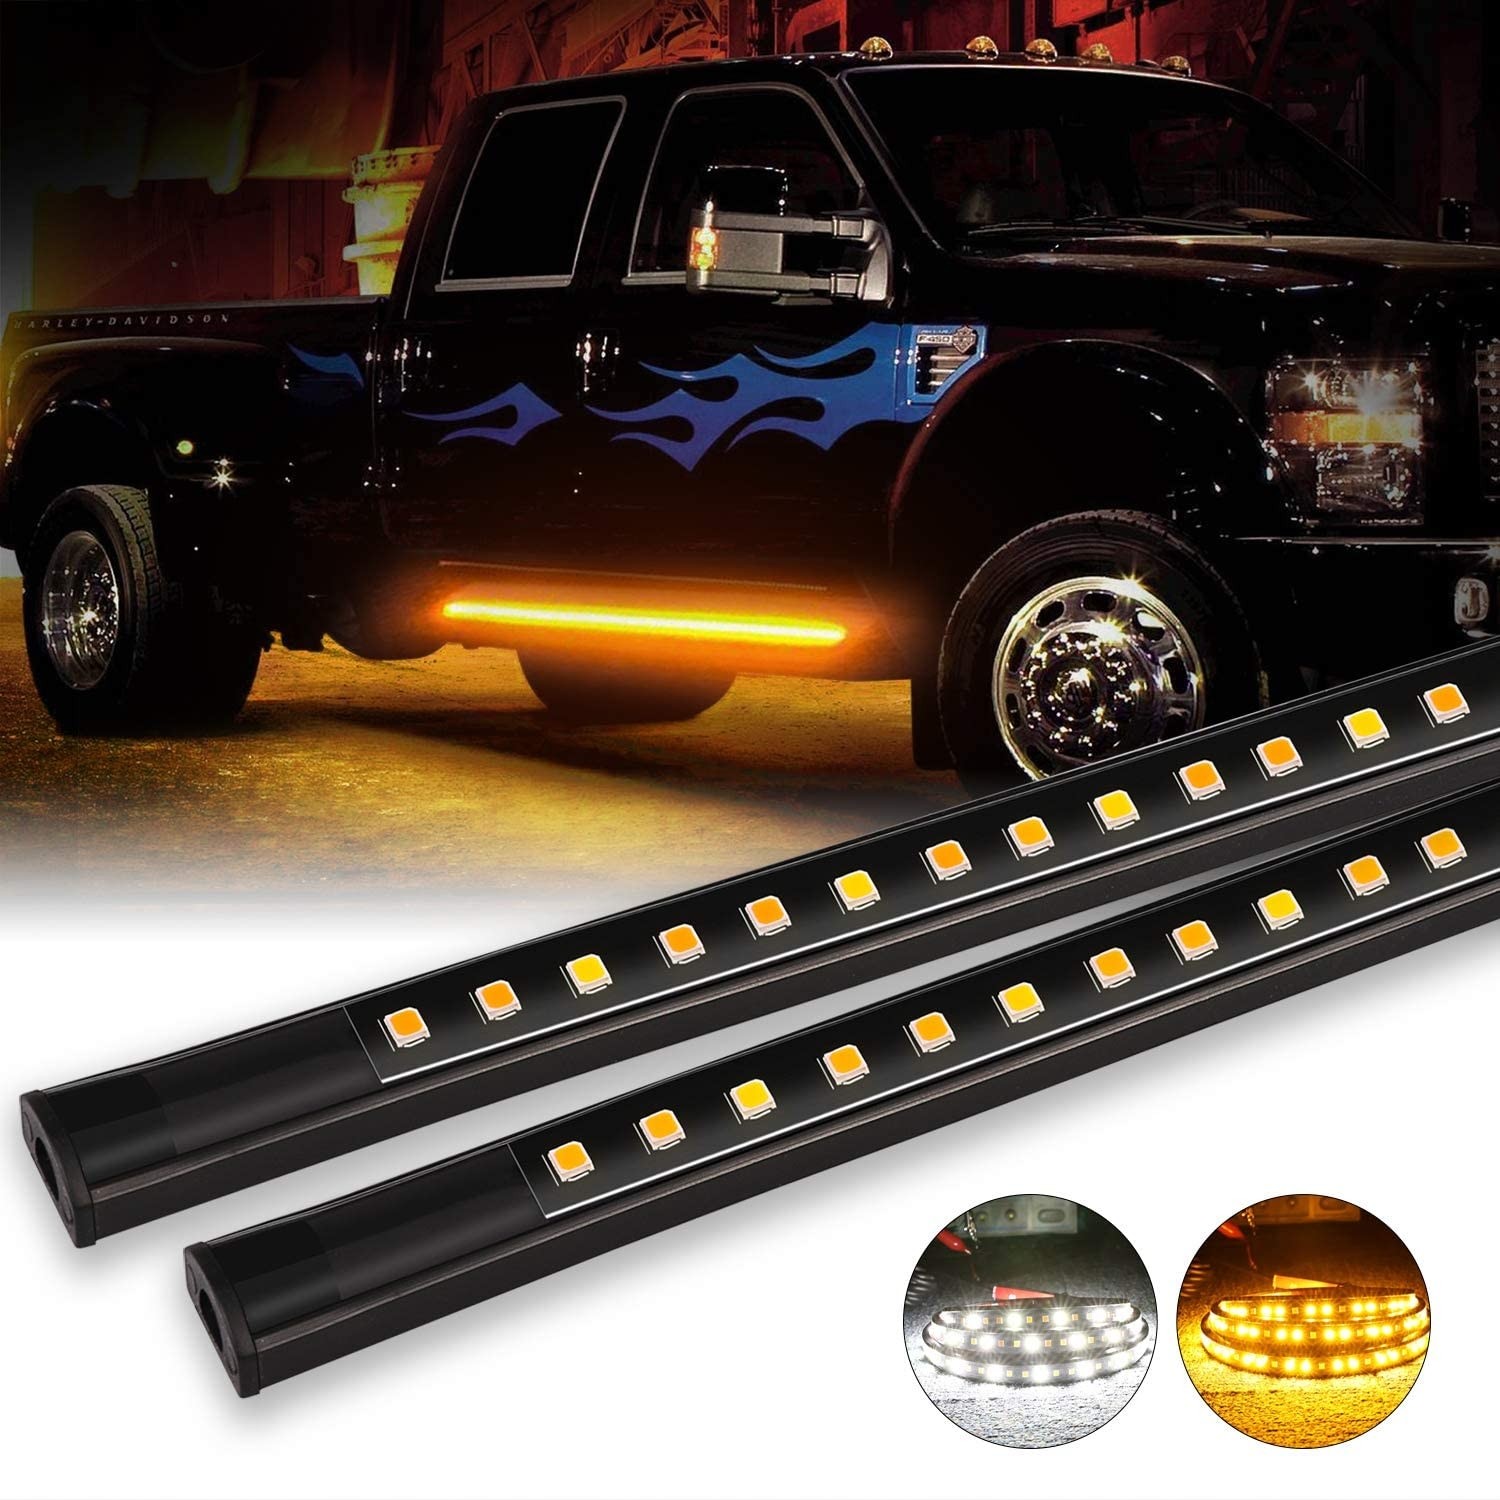 SUV 70 inch Pickup Niwaker 2Pcs 70 Inch Truck LED Running Board Lights for Extended Cab & Crew Cab Trucks Amber/White Turn Signal Side Marker & Courtesy Light Bar Strip Truck Bed lights for Trucks 